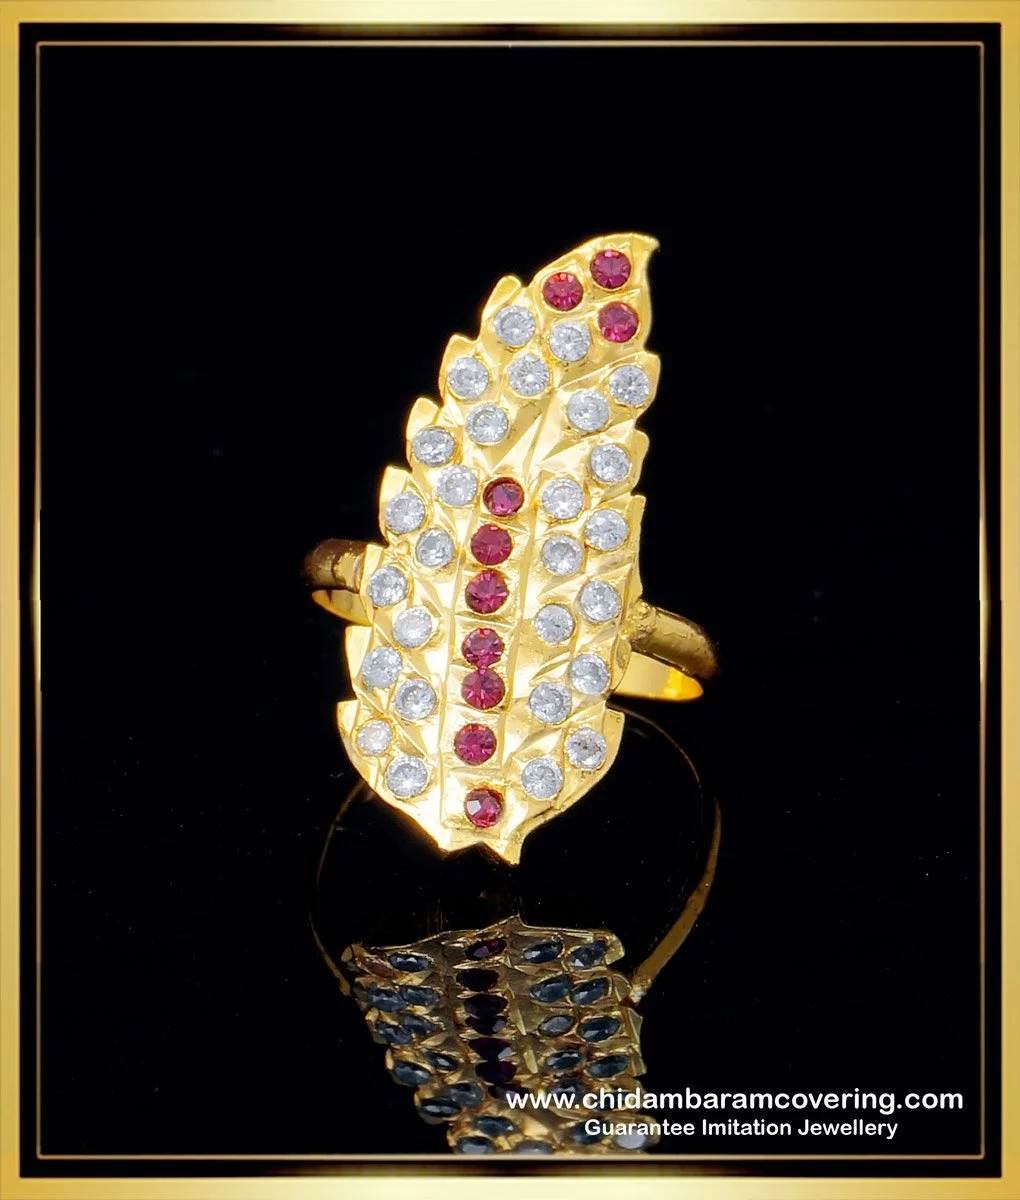 Round Women's Leaf Design 14k Gold Diamond Ring For Ladies, Weight: 2.01gm  at Rs 12600 in Surat